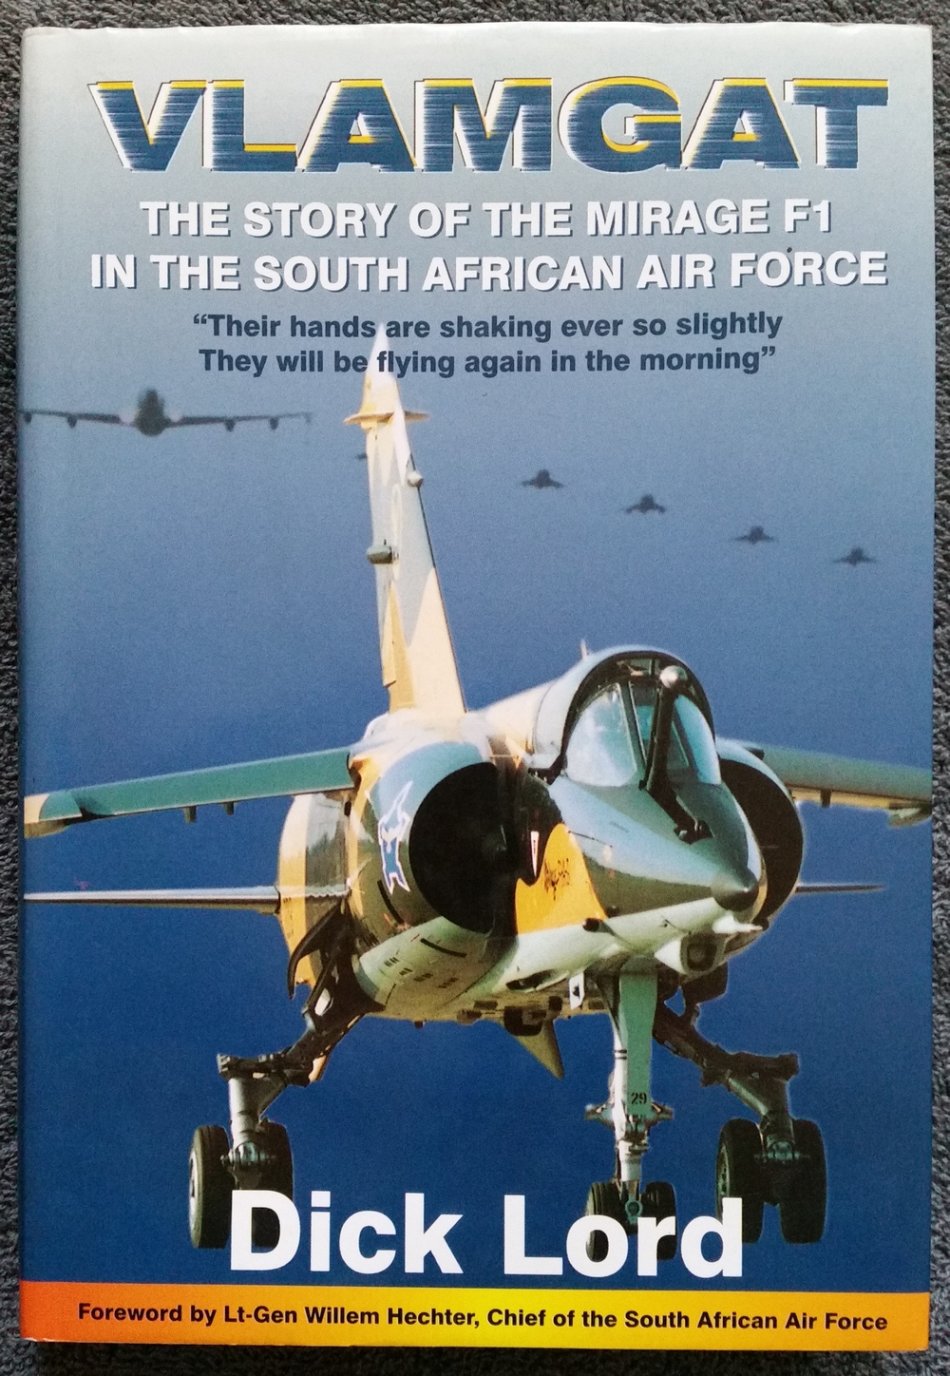 Vlamgat: The Story of the Mirage F1 in the South African Air Force - Hardcover 1st Edition - VF